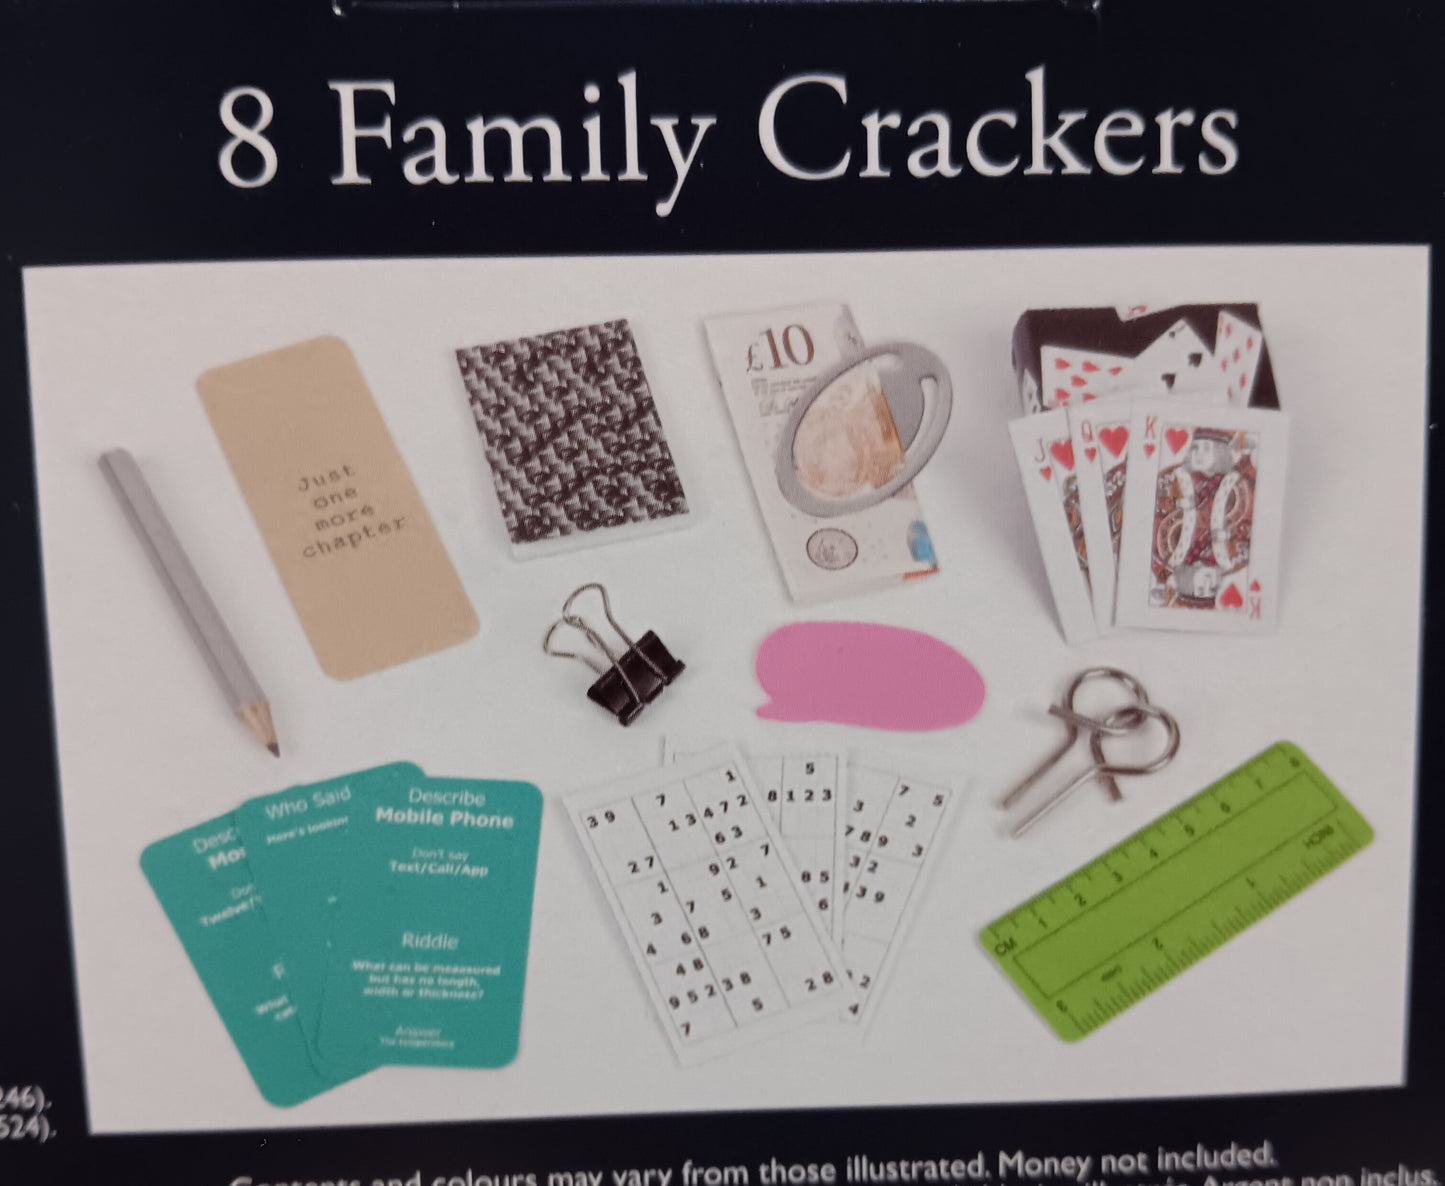 Tom Smith: Family Crackers: 8 Pack